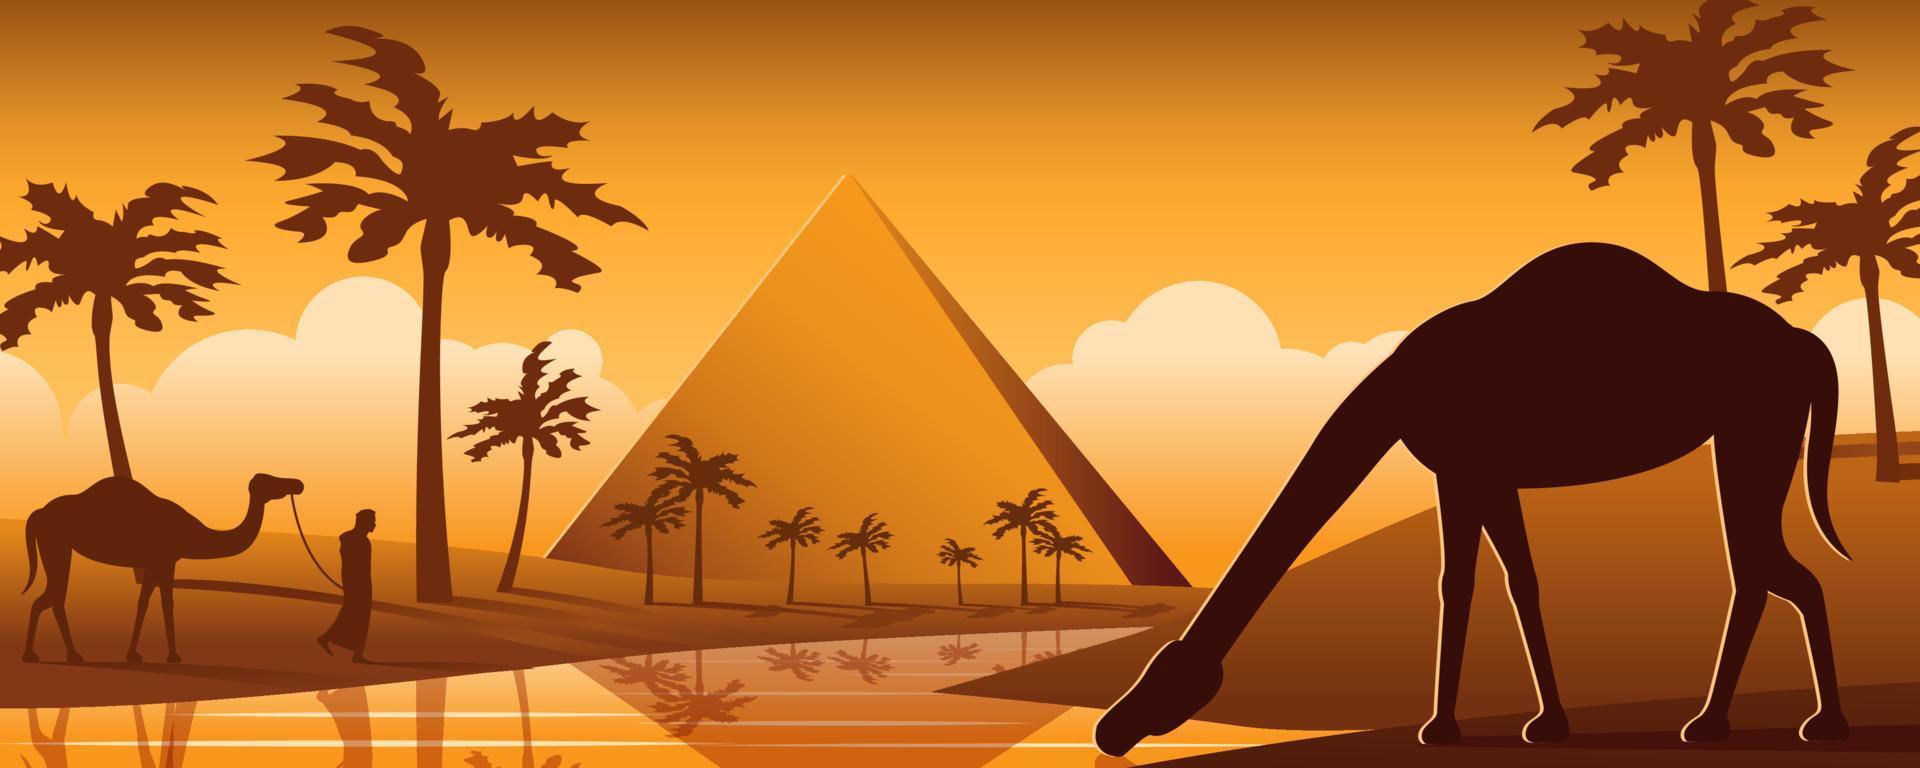 Camel drink water in oasis desert nearby Pyramid,silhouette cartoon design vector